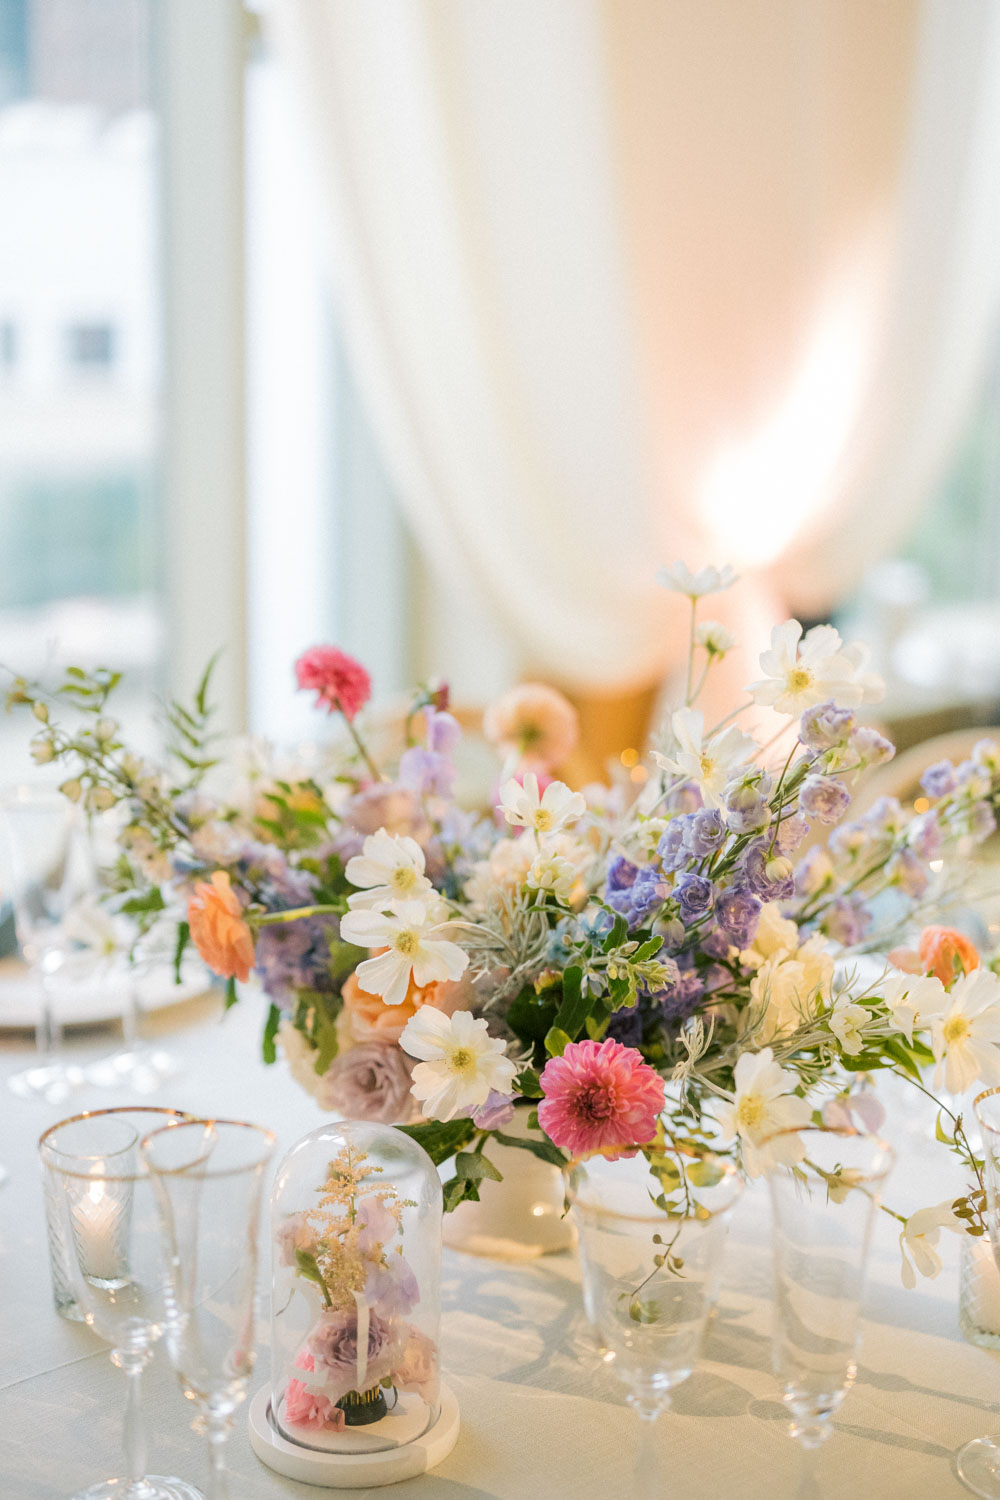 A colorful floral arrangement for a wedding at The Peninsula hotel in Chicago.